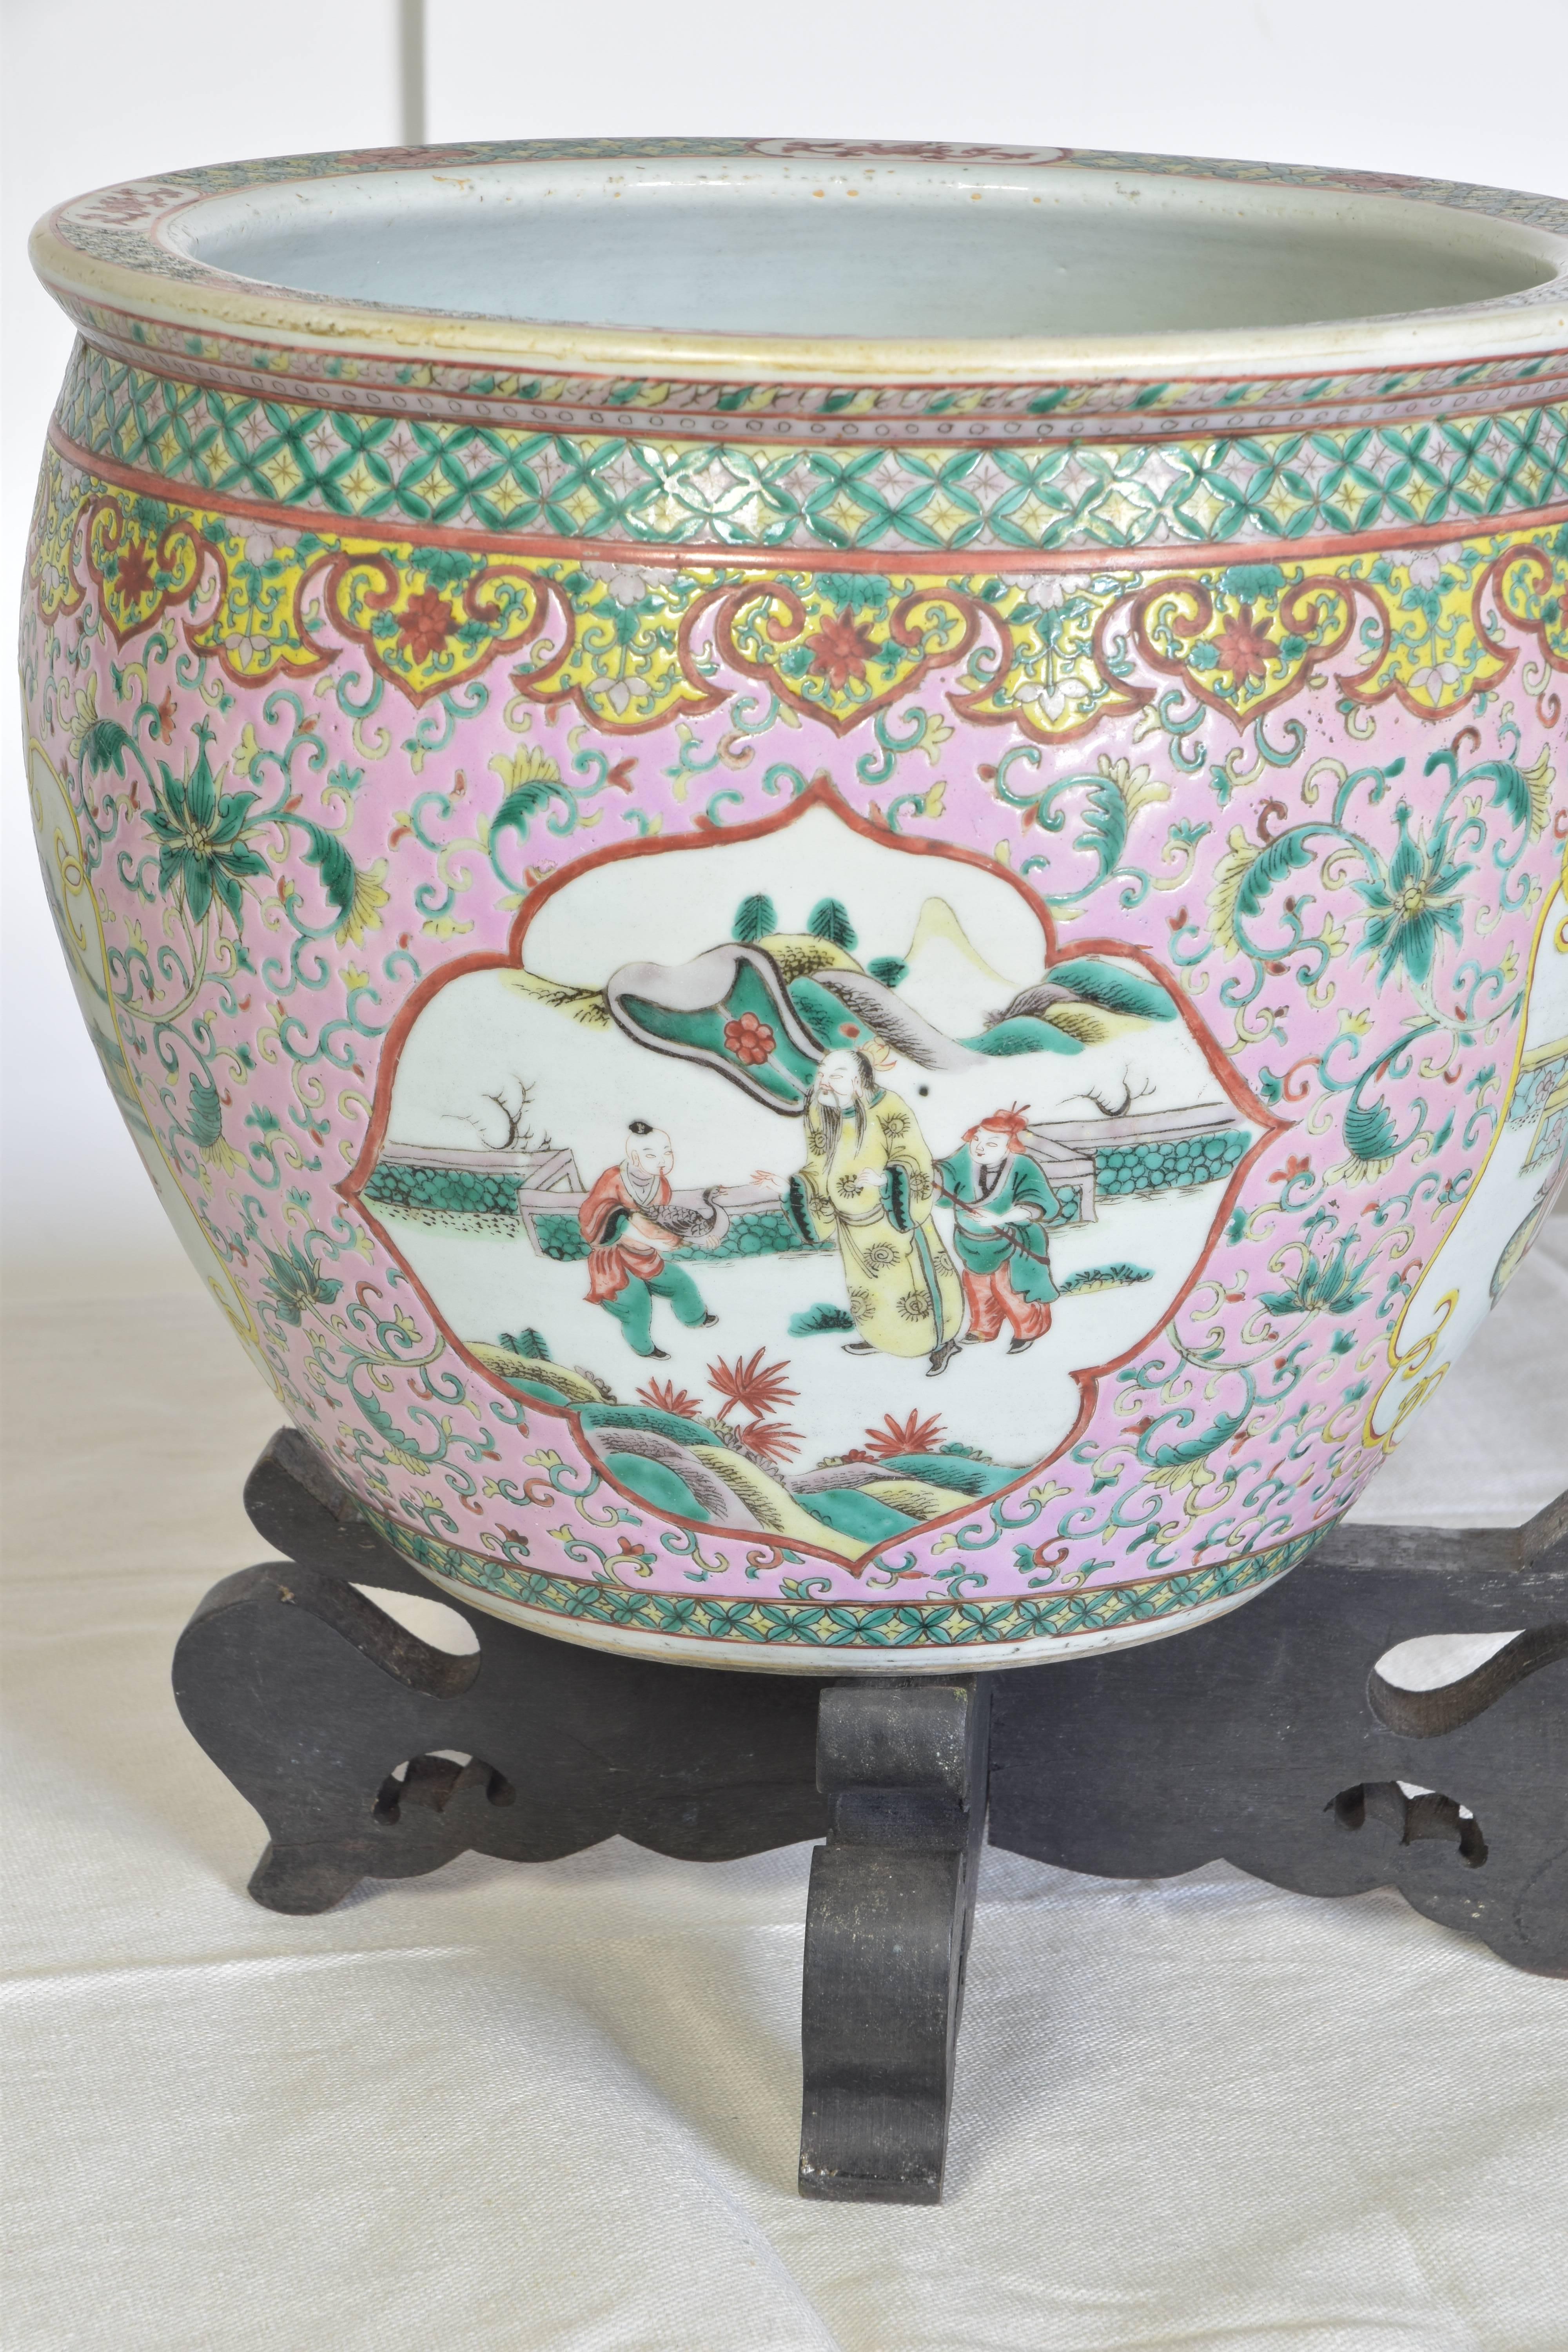 Large hand-painted Chinese jardiniere in pale aqua, rose, white and yellow hues. The piece features four medallions with hand-painted figures that feature delicately detailed faces. The piece is hand-painted on the interior with goldfish. Listing